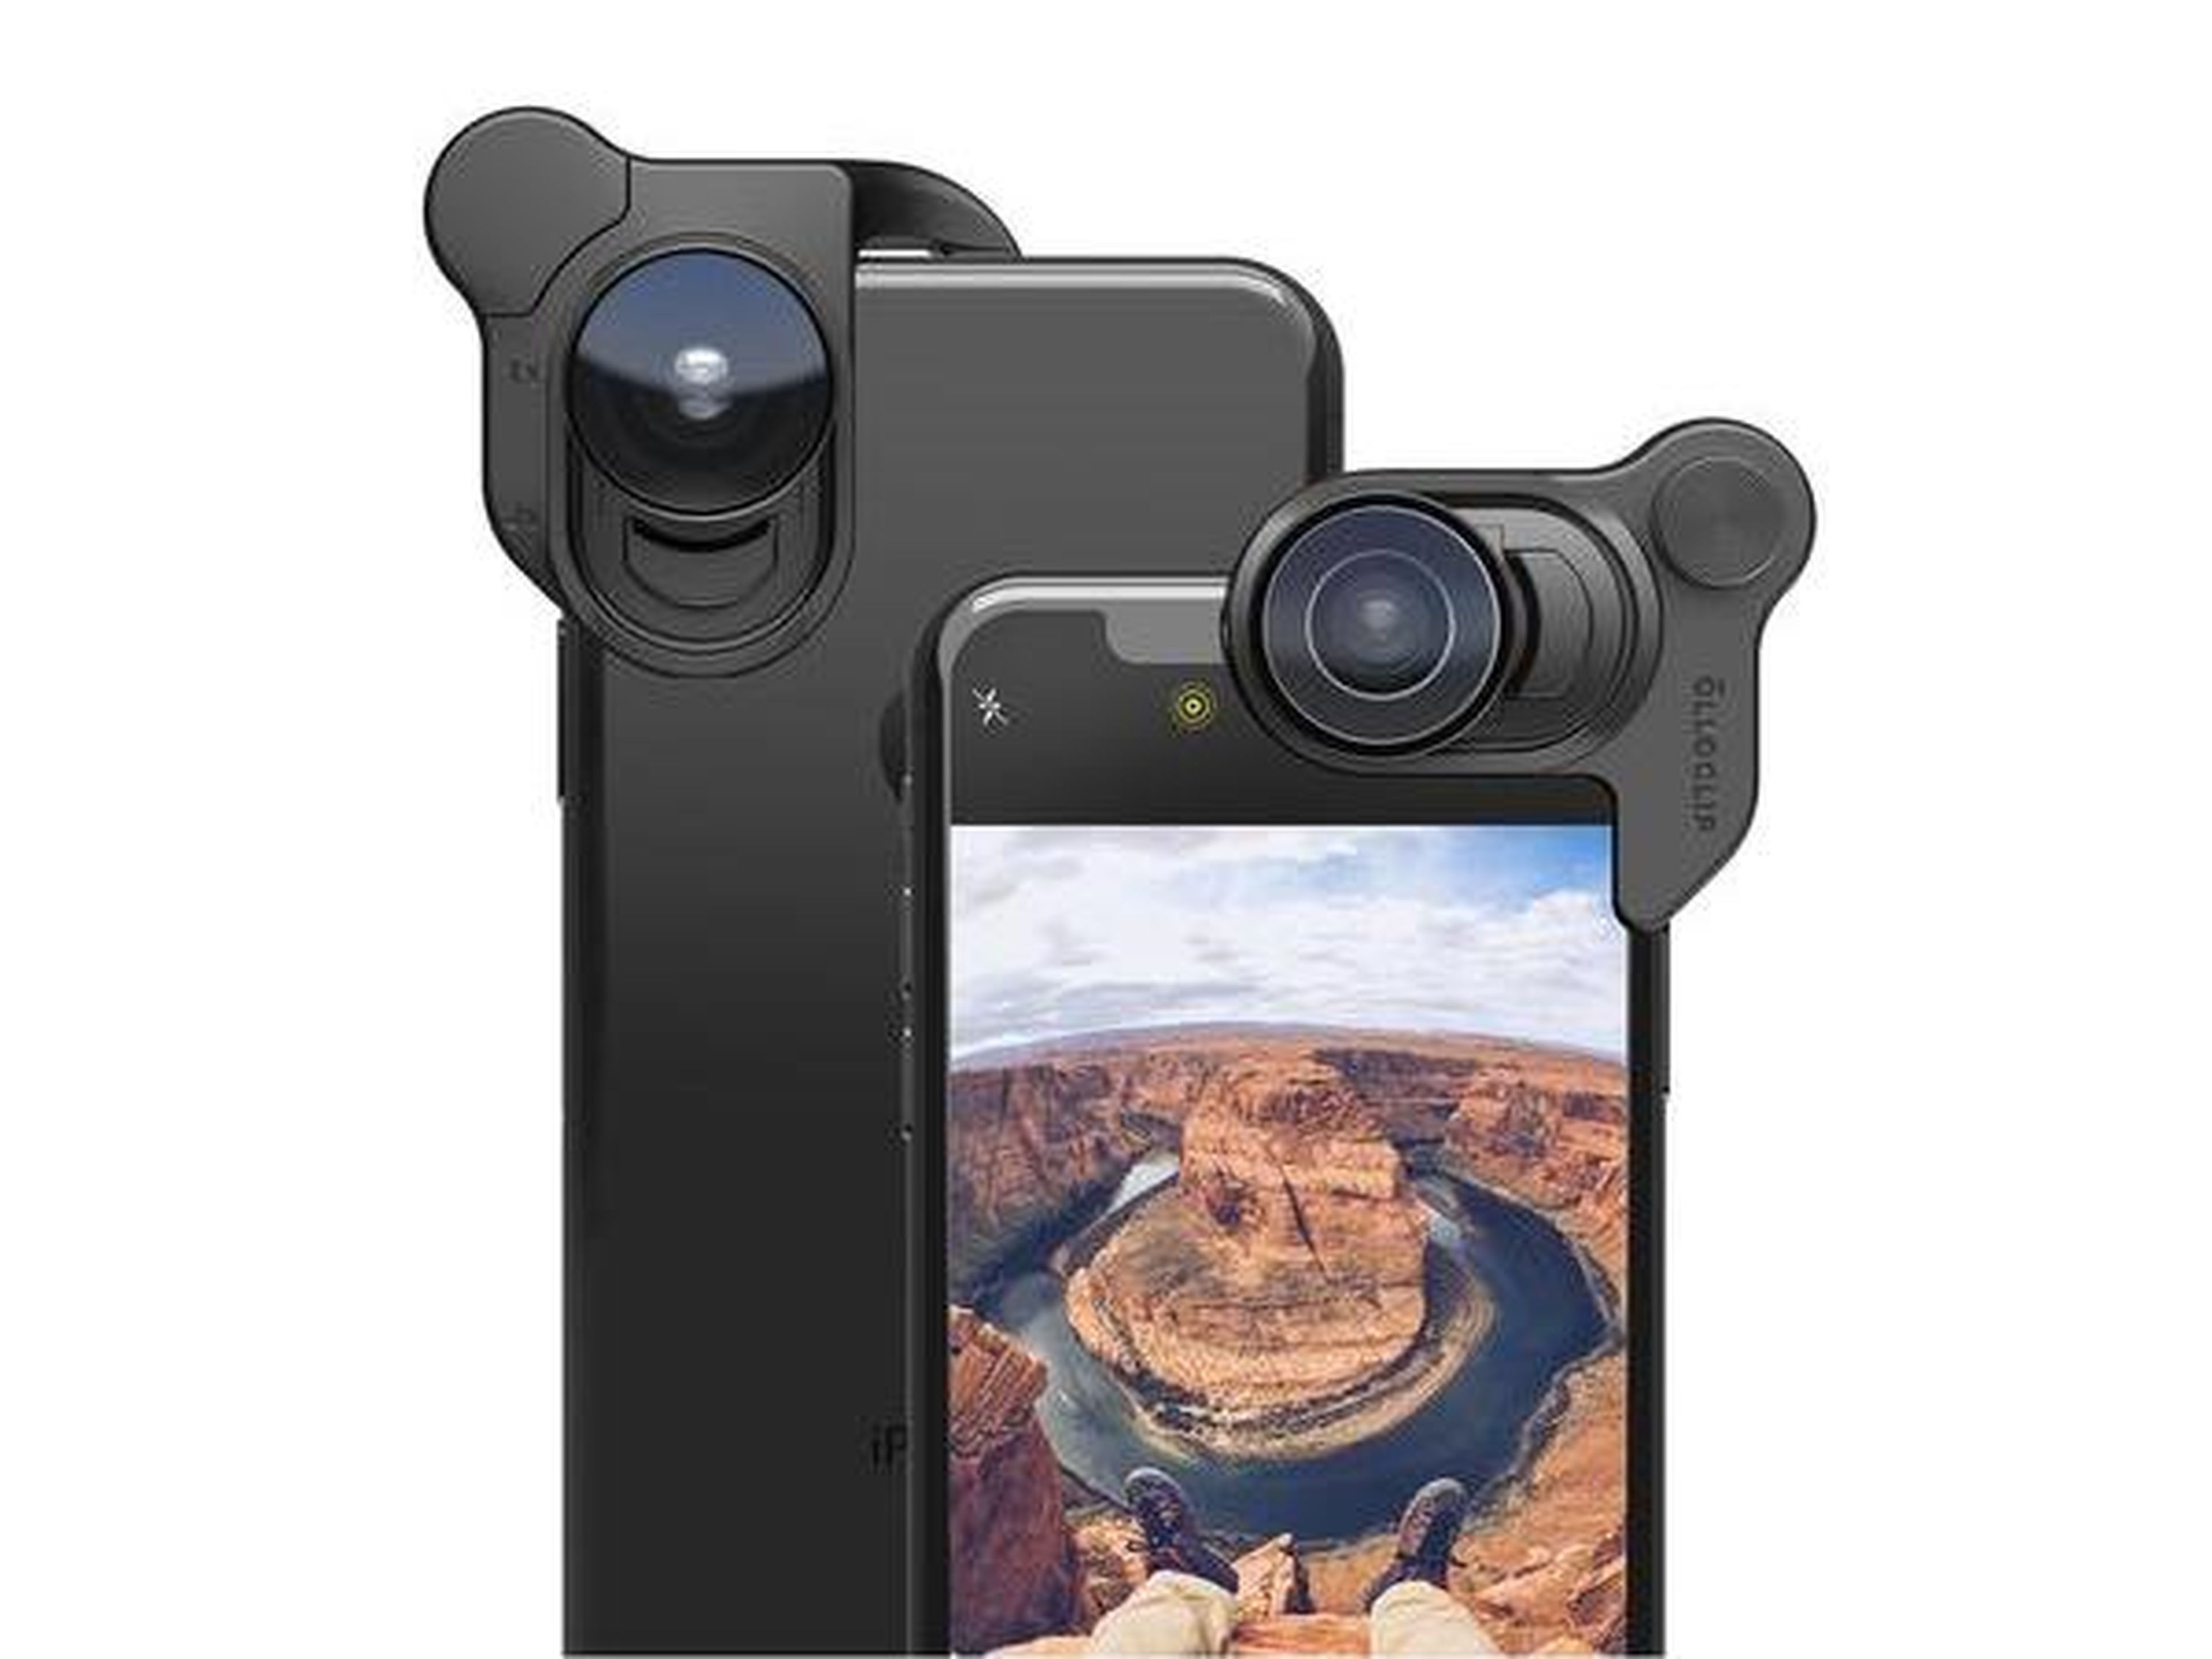 Interchangeable lenses for a smartphone camera